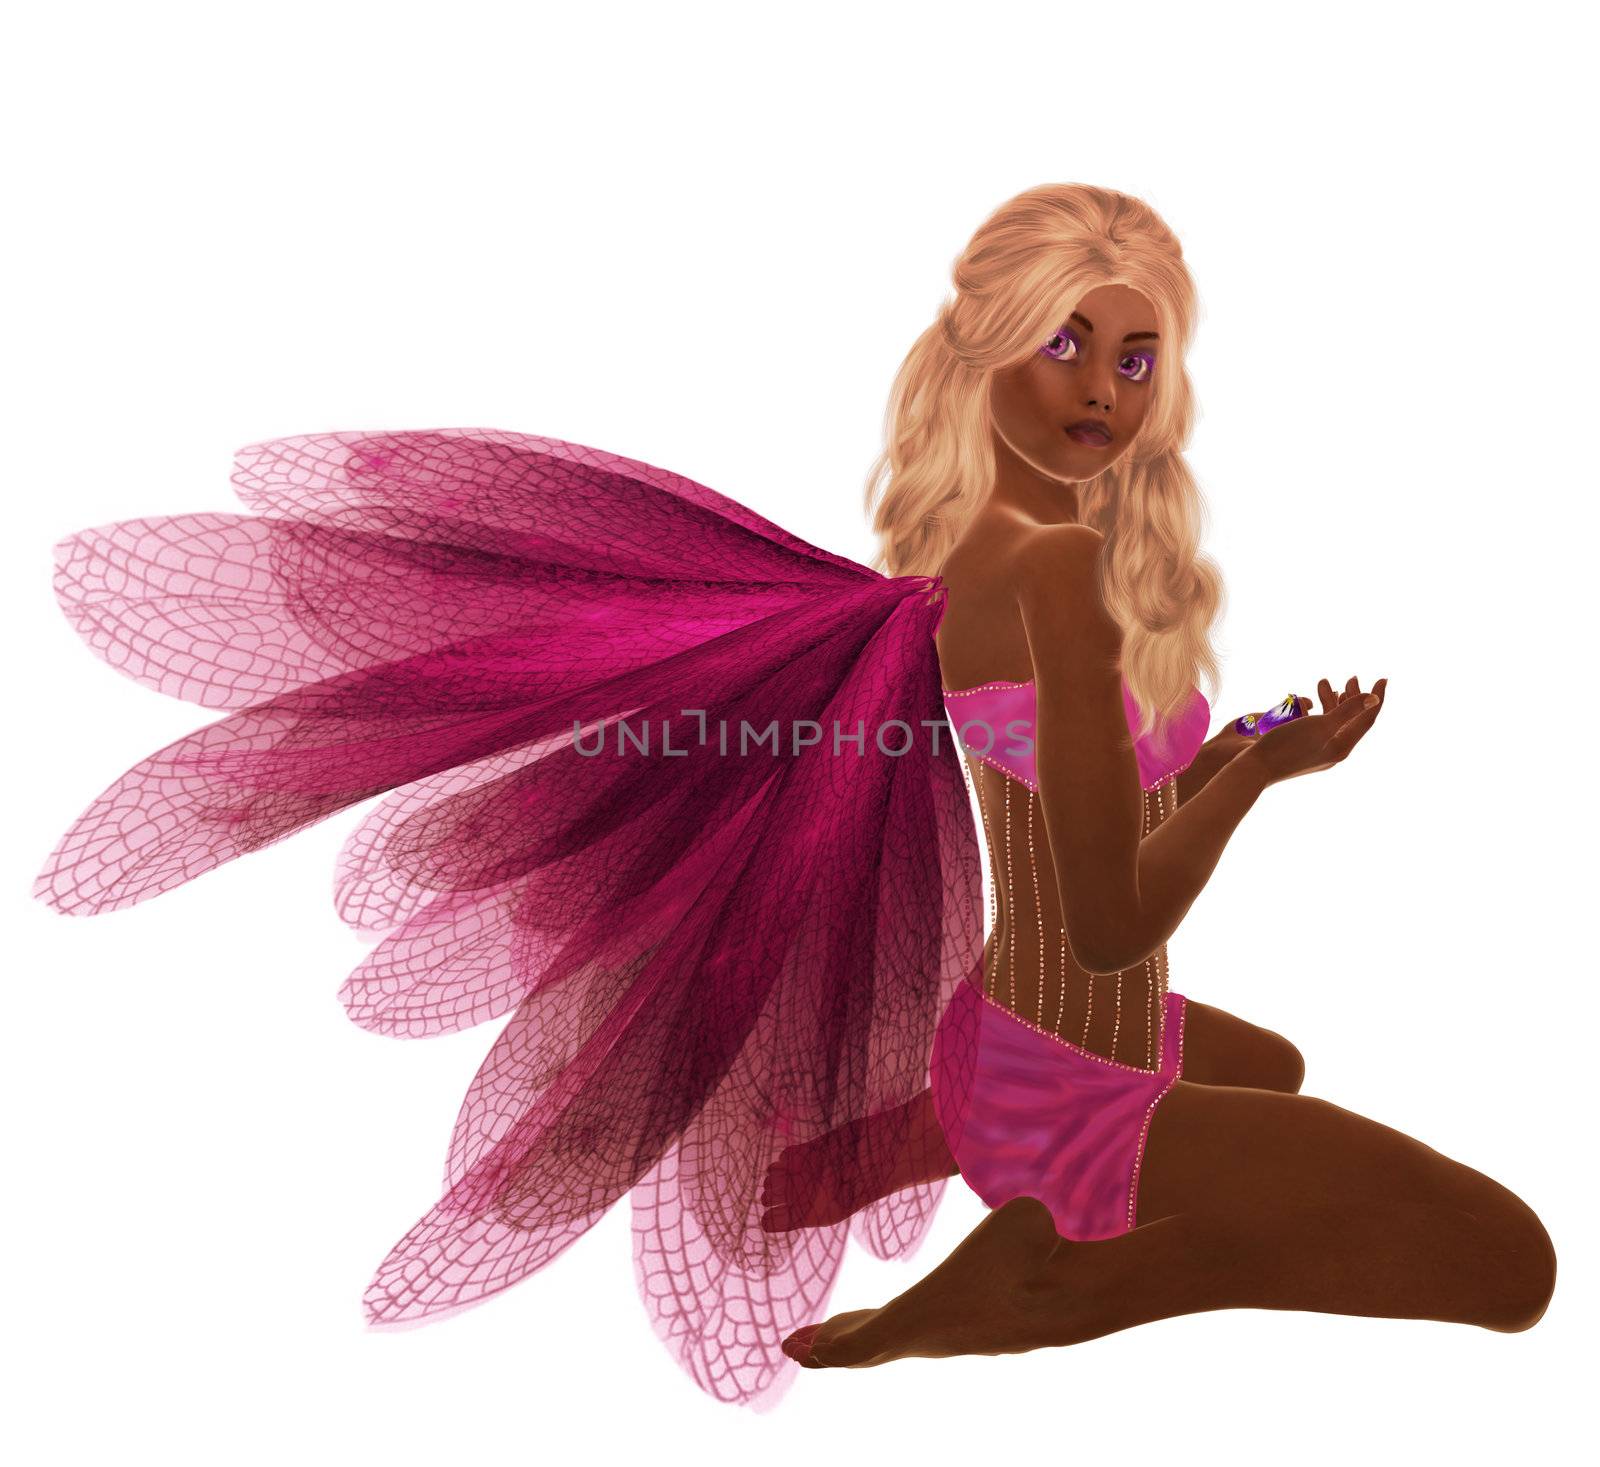 Pink fairy with blonde hair, sitting holding flowers in her hand